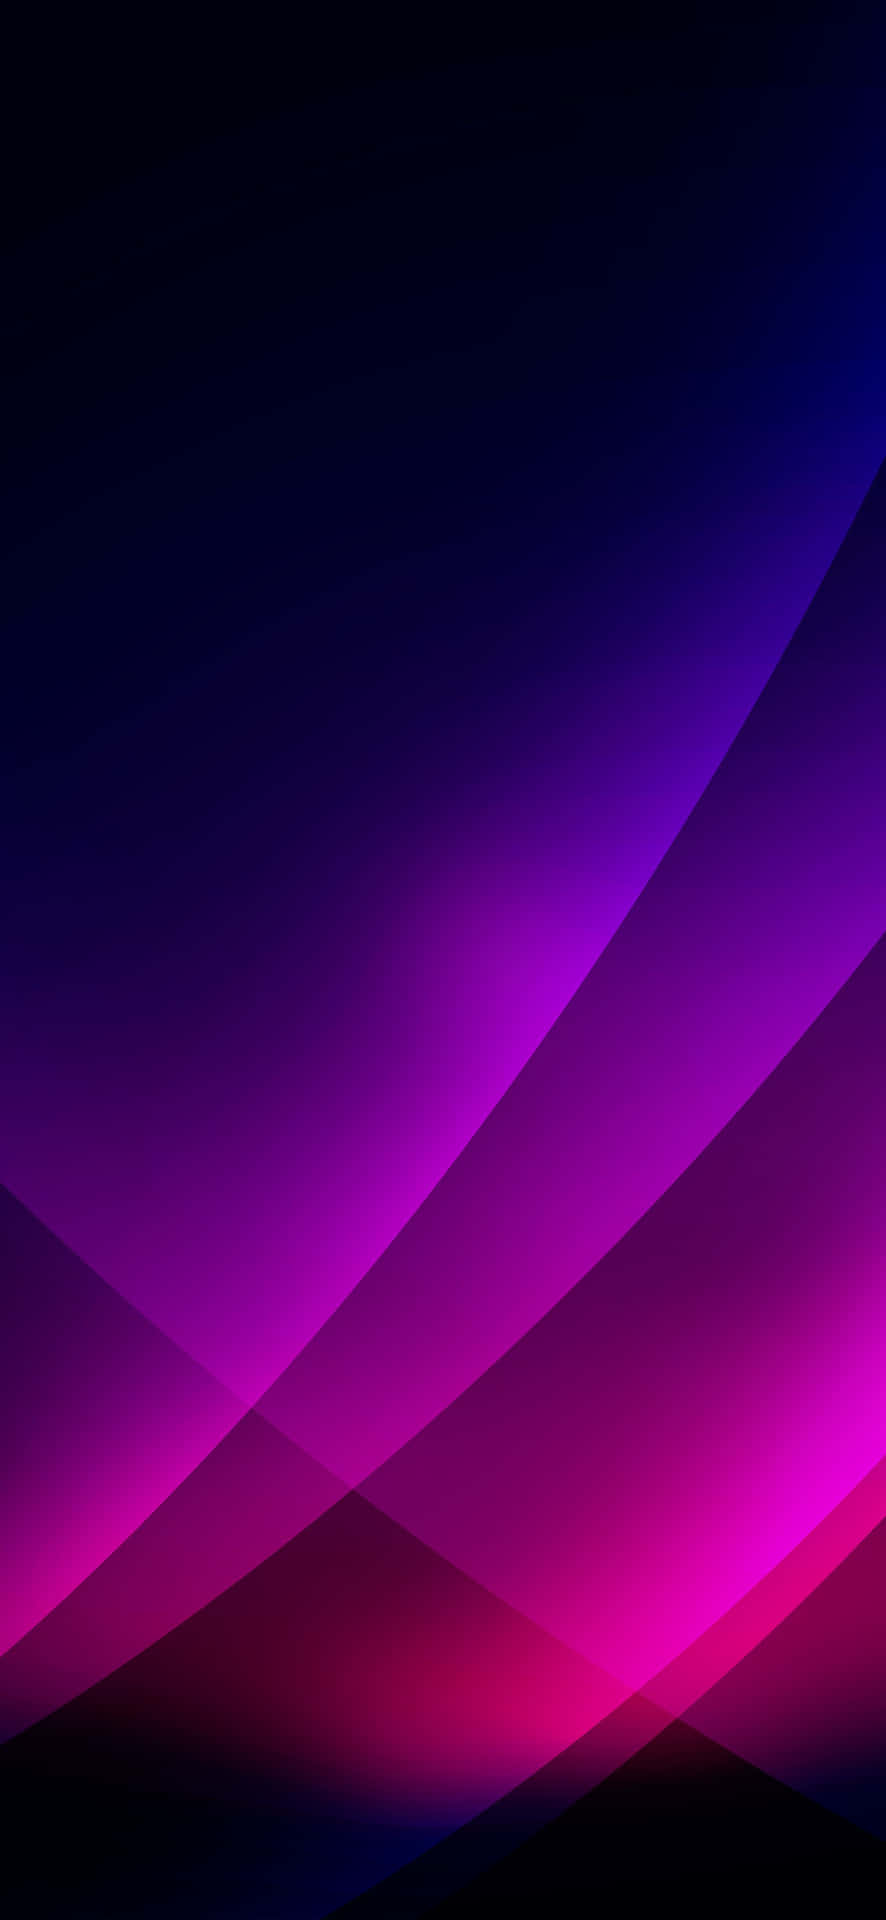 Abstract Purple Blue Gradient Background Wallpaper